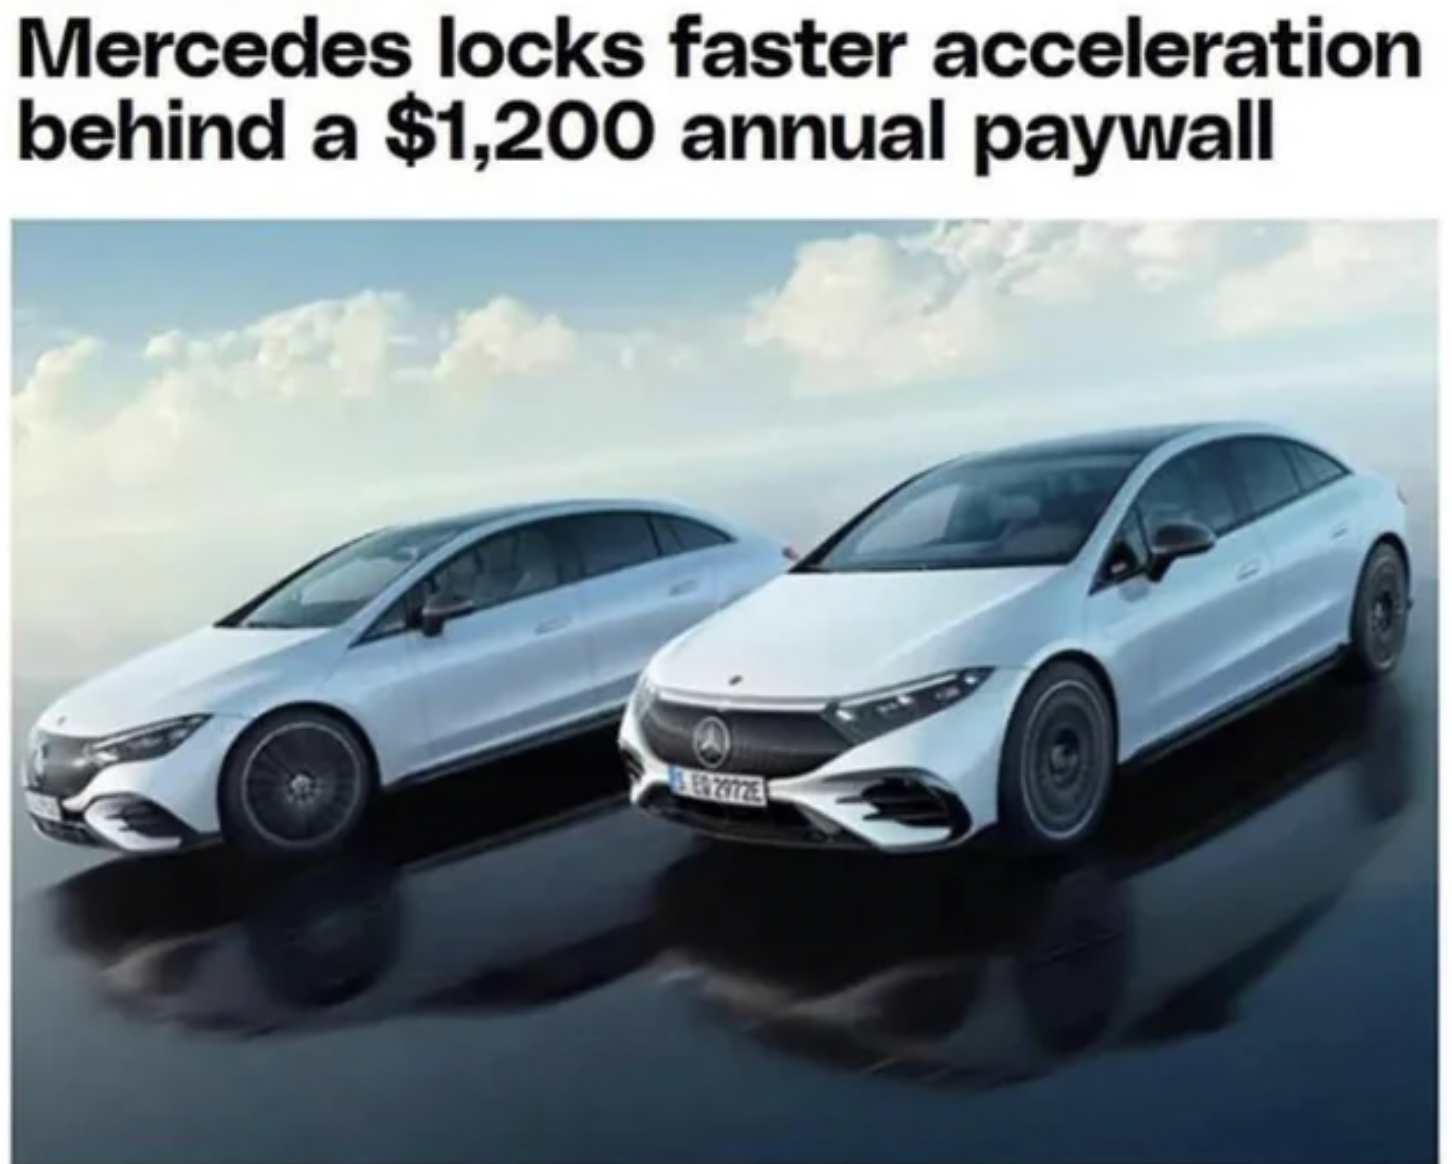 microtransaction  - Mercedes locks faster acceleration behind a $1,200 annual paywall